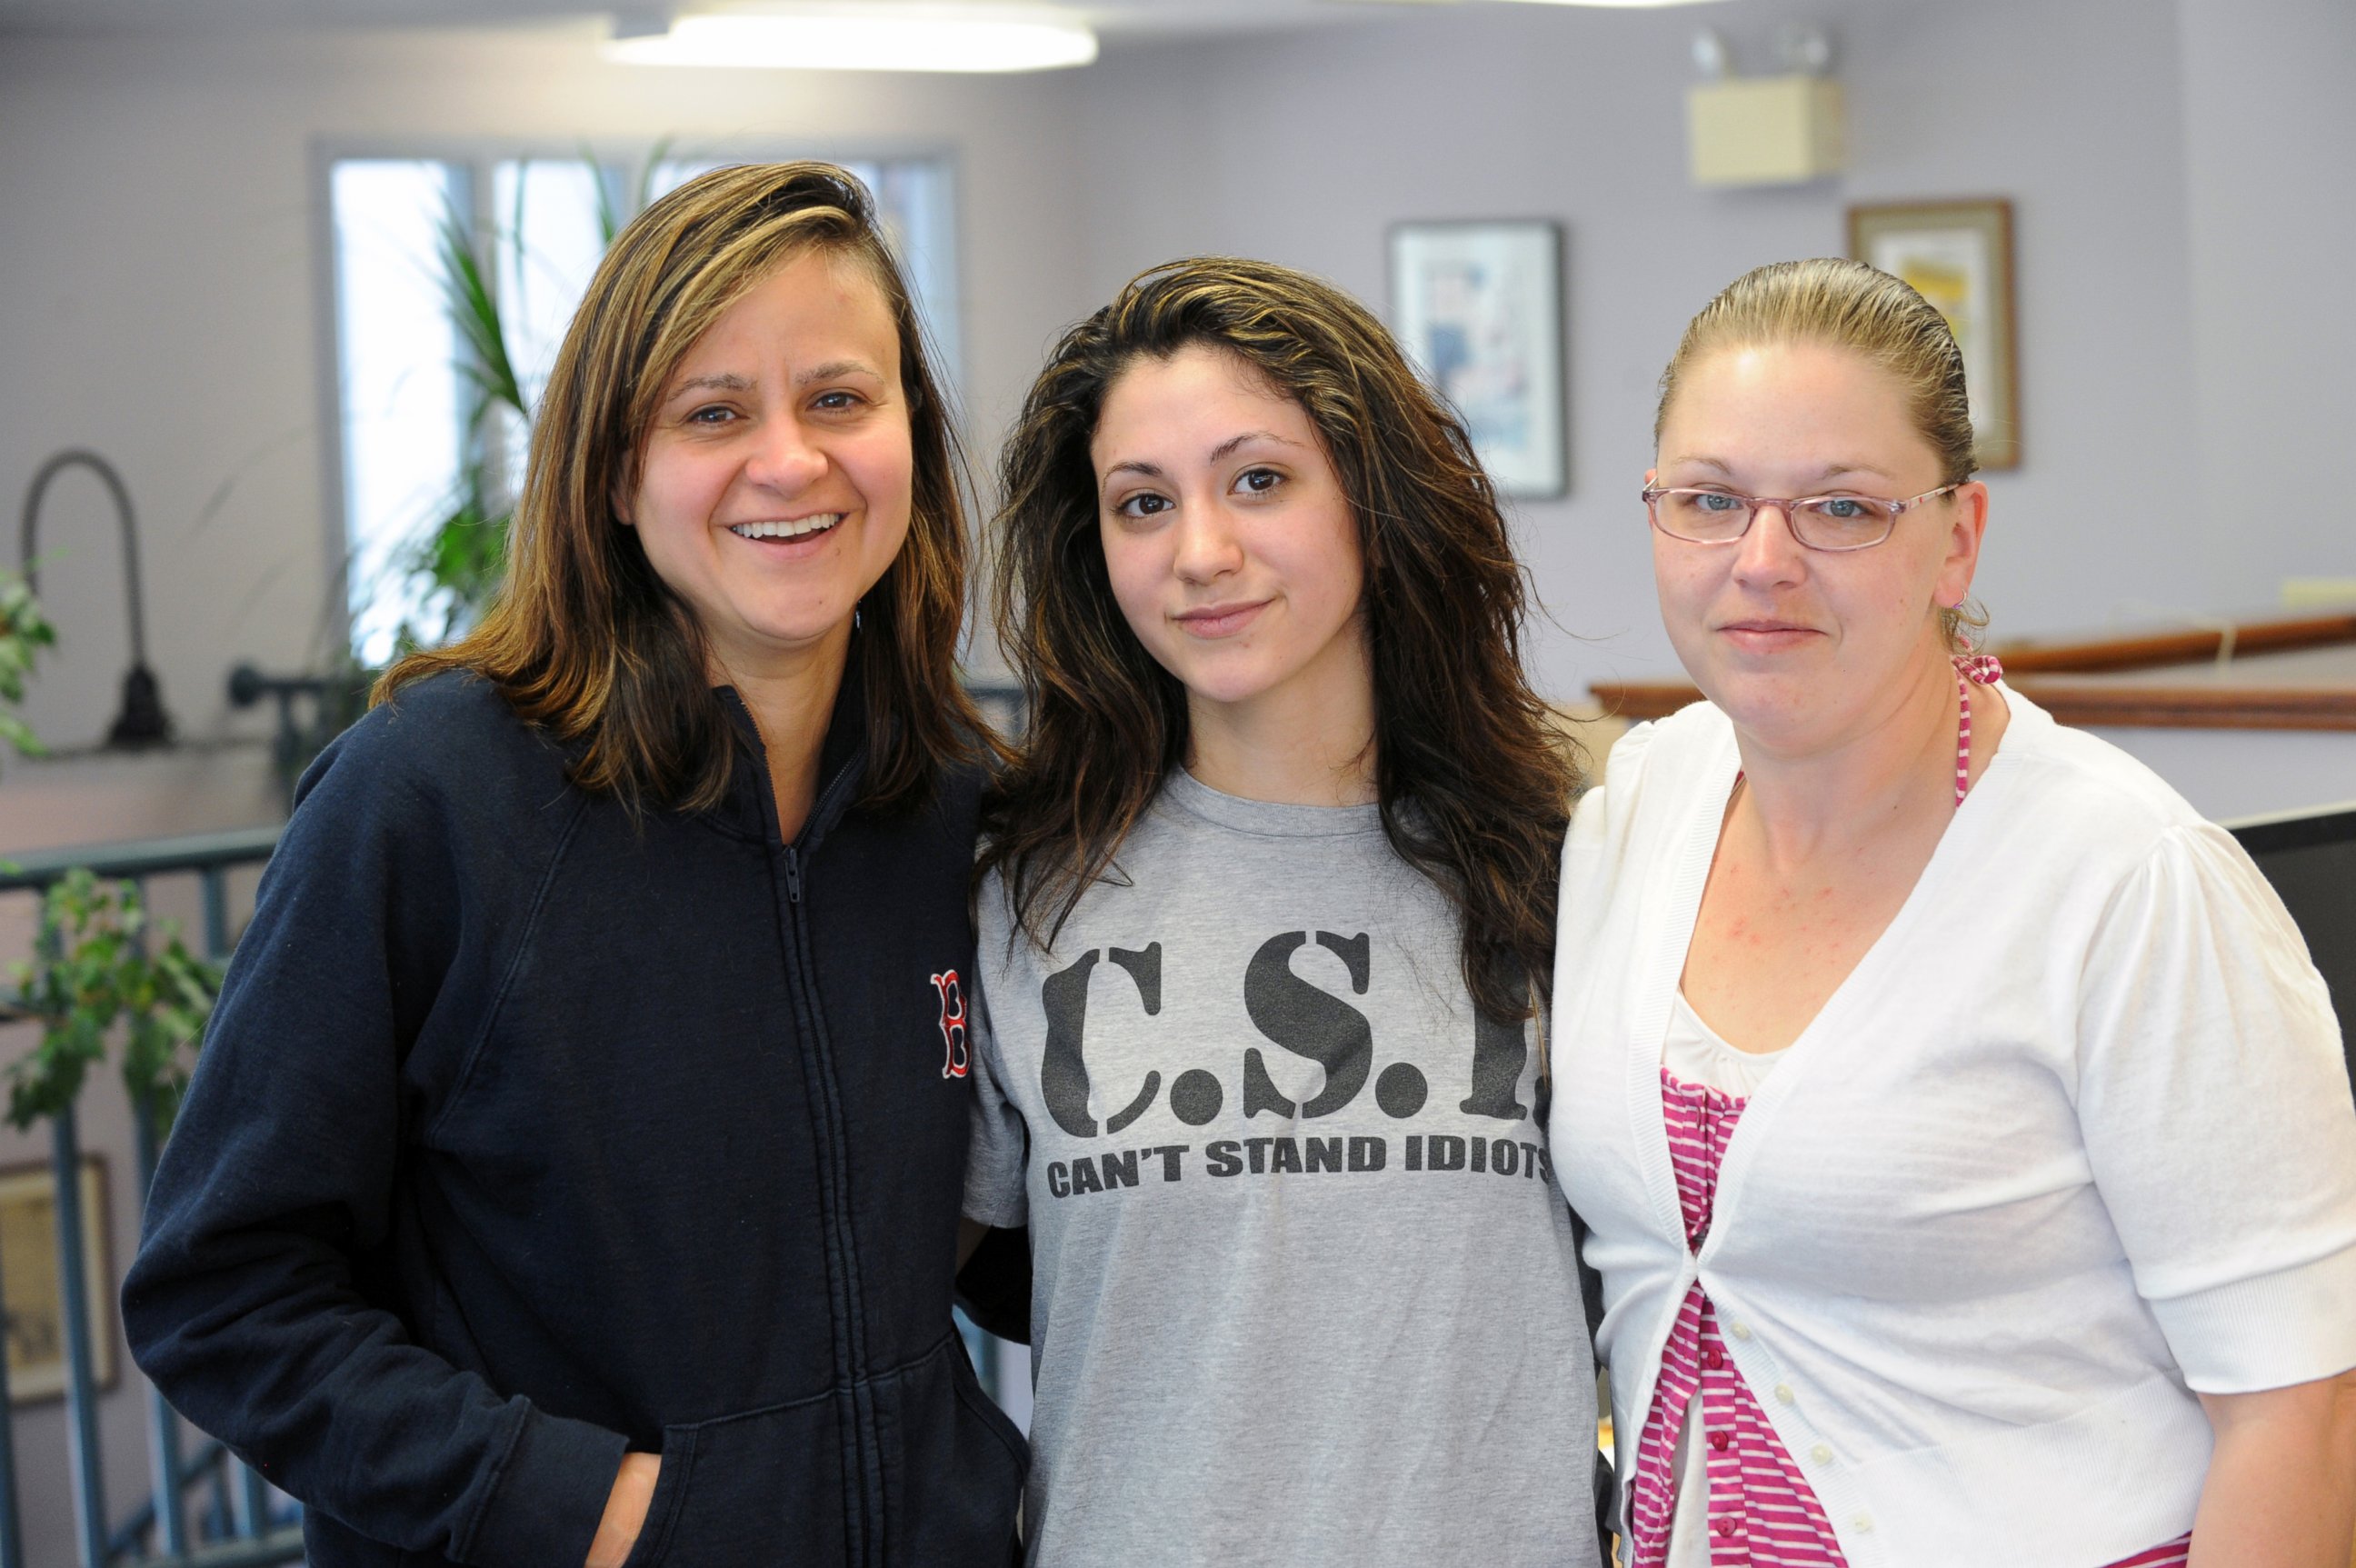 PHOTO: From left, Zenya Hernandez, Abby Hernandez, and family friend Amanda Smith, are pictured.